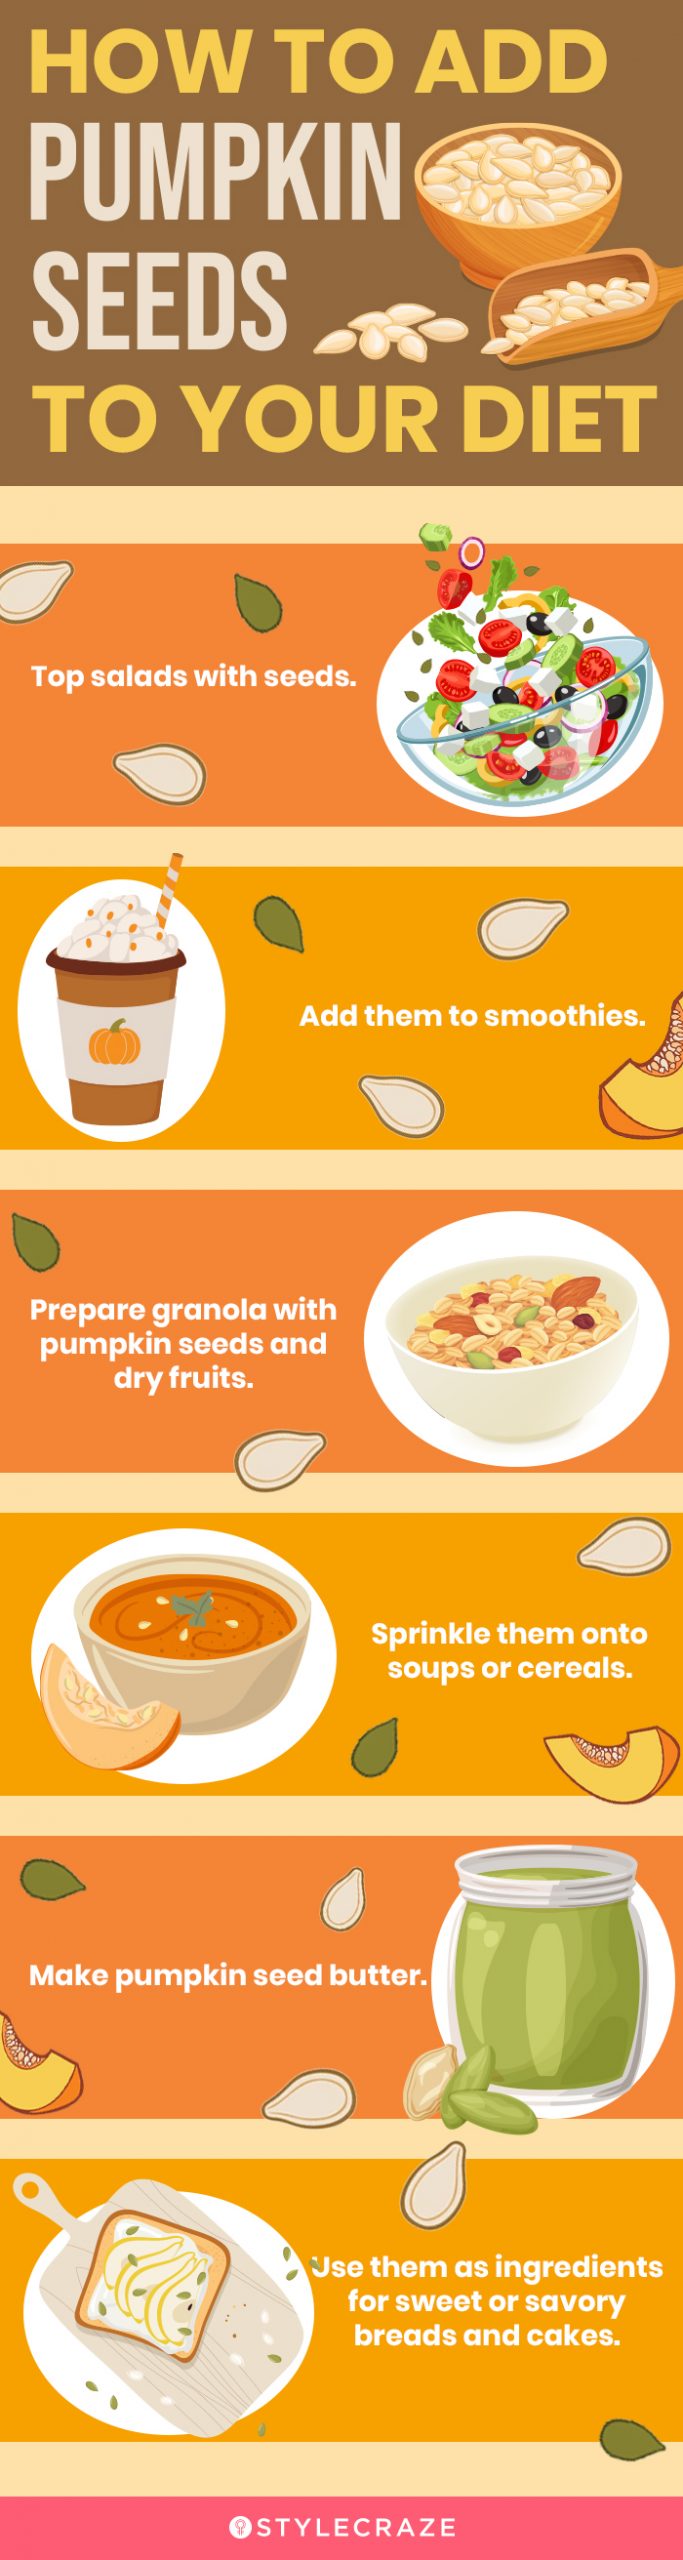 how to add pumpkin seeds to your diet (infographic)